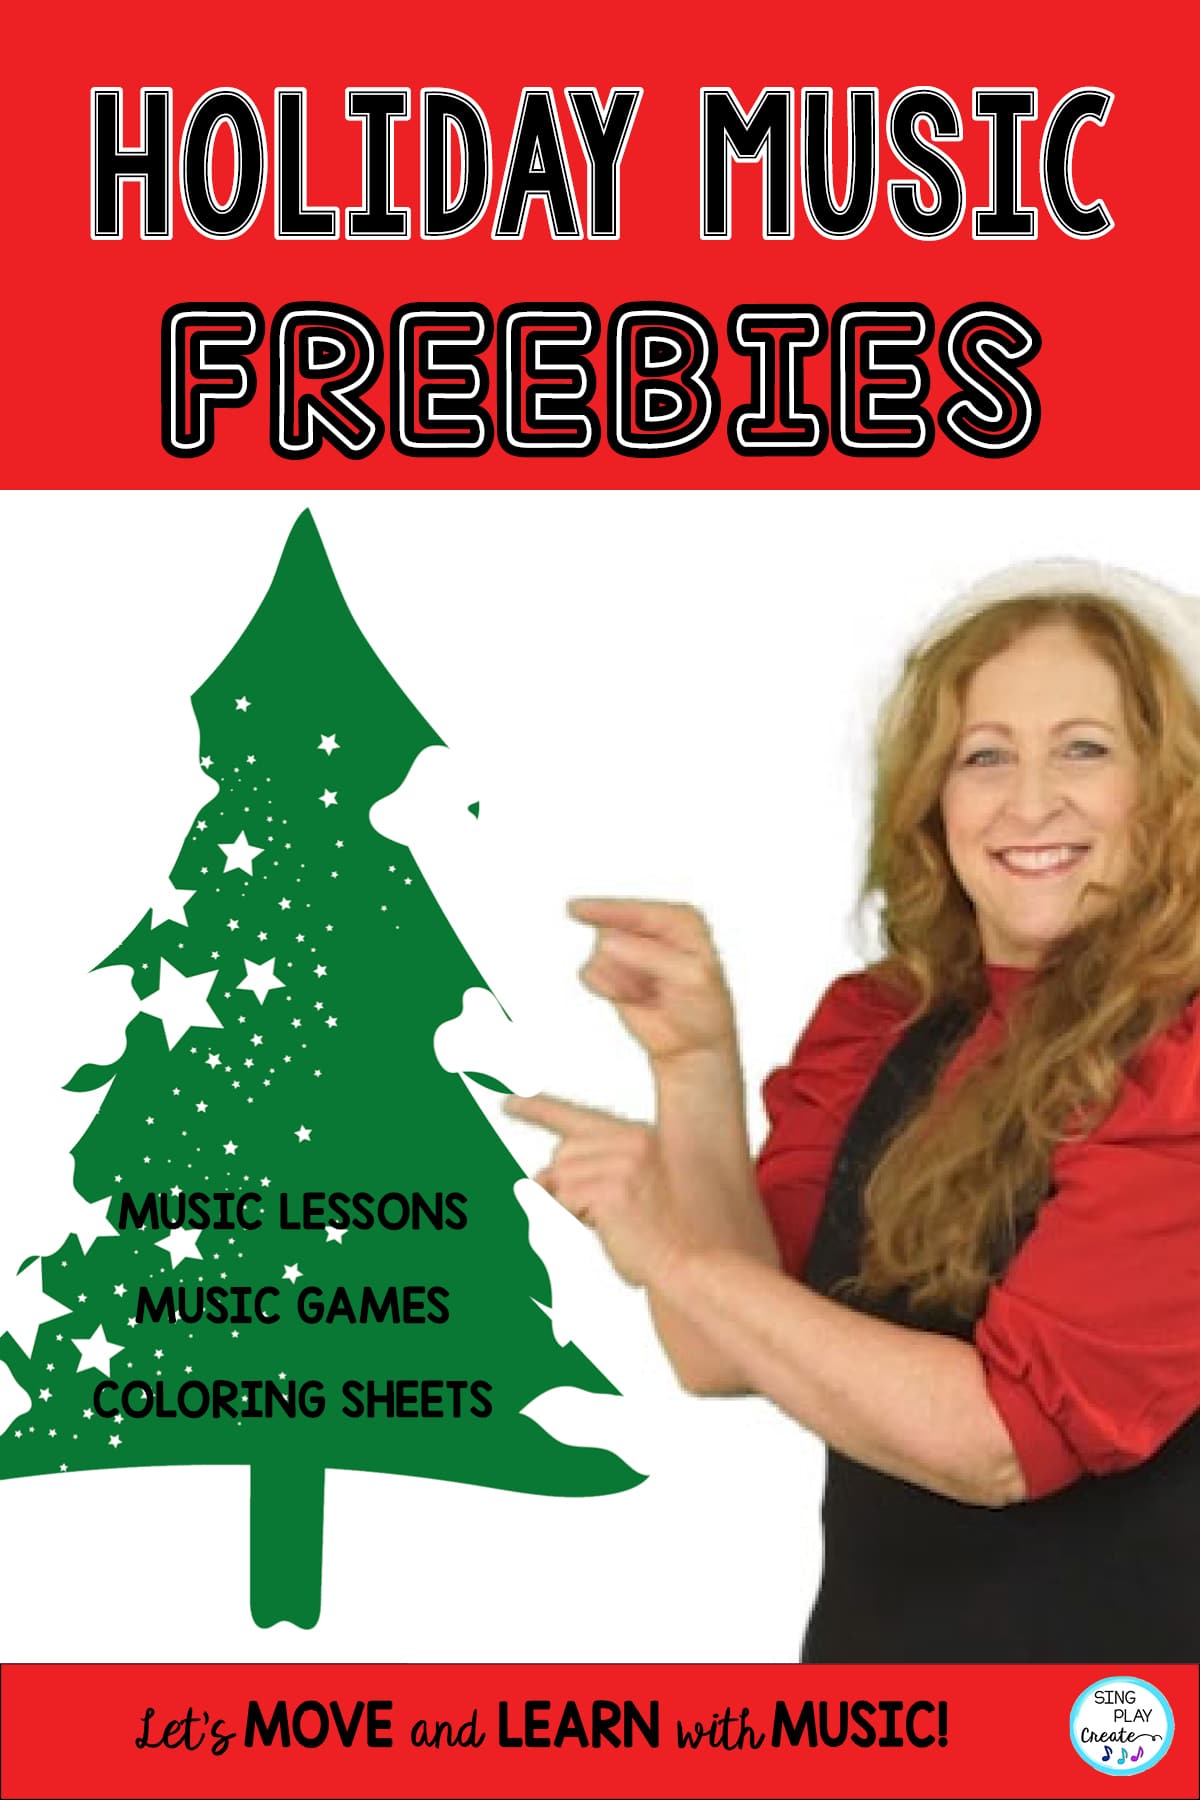  Happy Holidays and a Holiday Freebie! With all teachers on the countdown to their Holiday Break, including myself-I thought I'd pass along a Holiday Freebie! Check back soon for updated files and links to more Holiday Freebies.